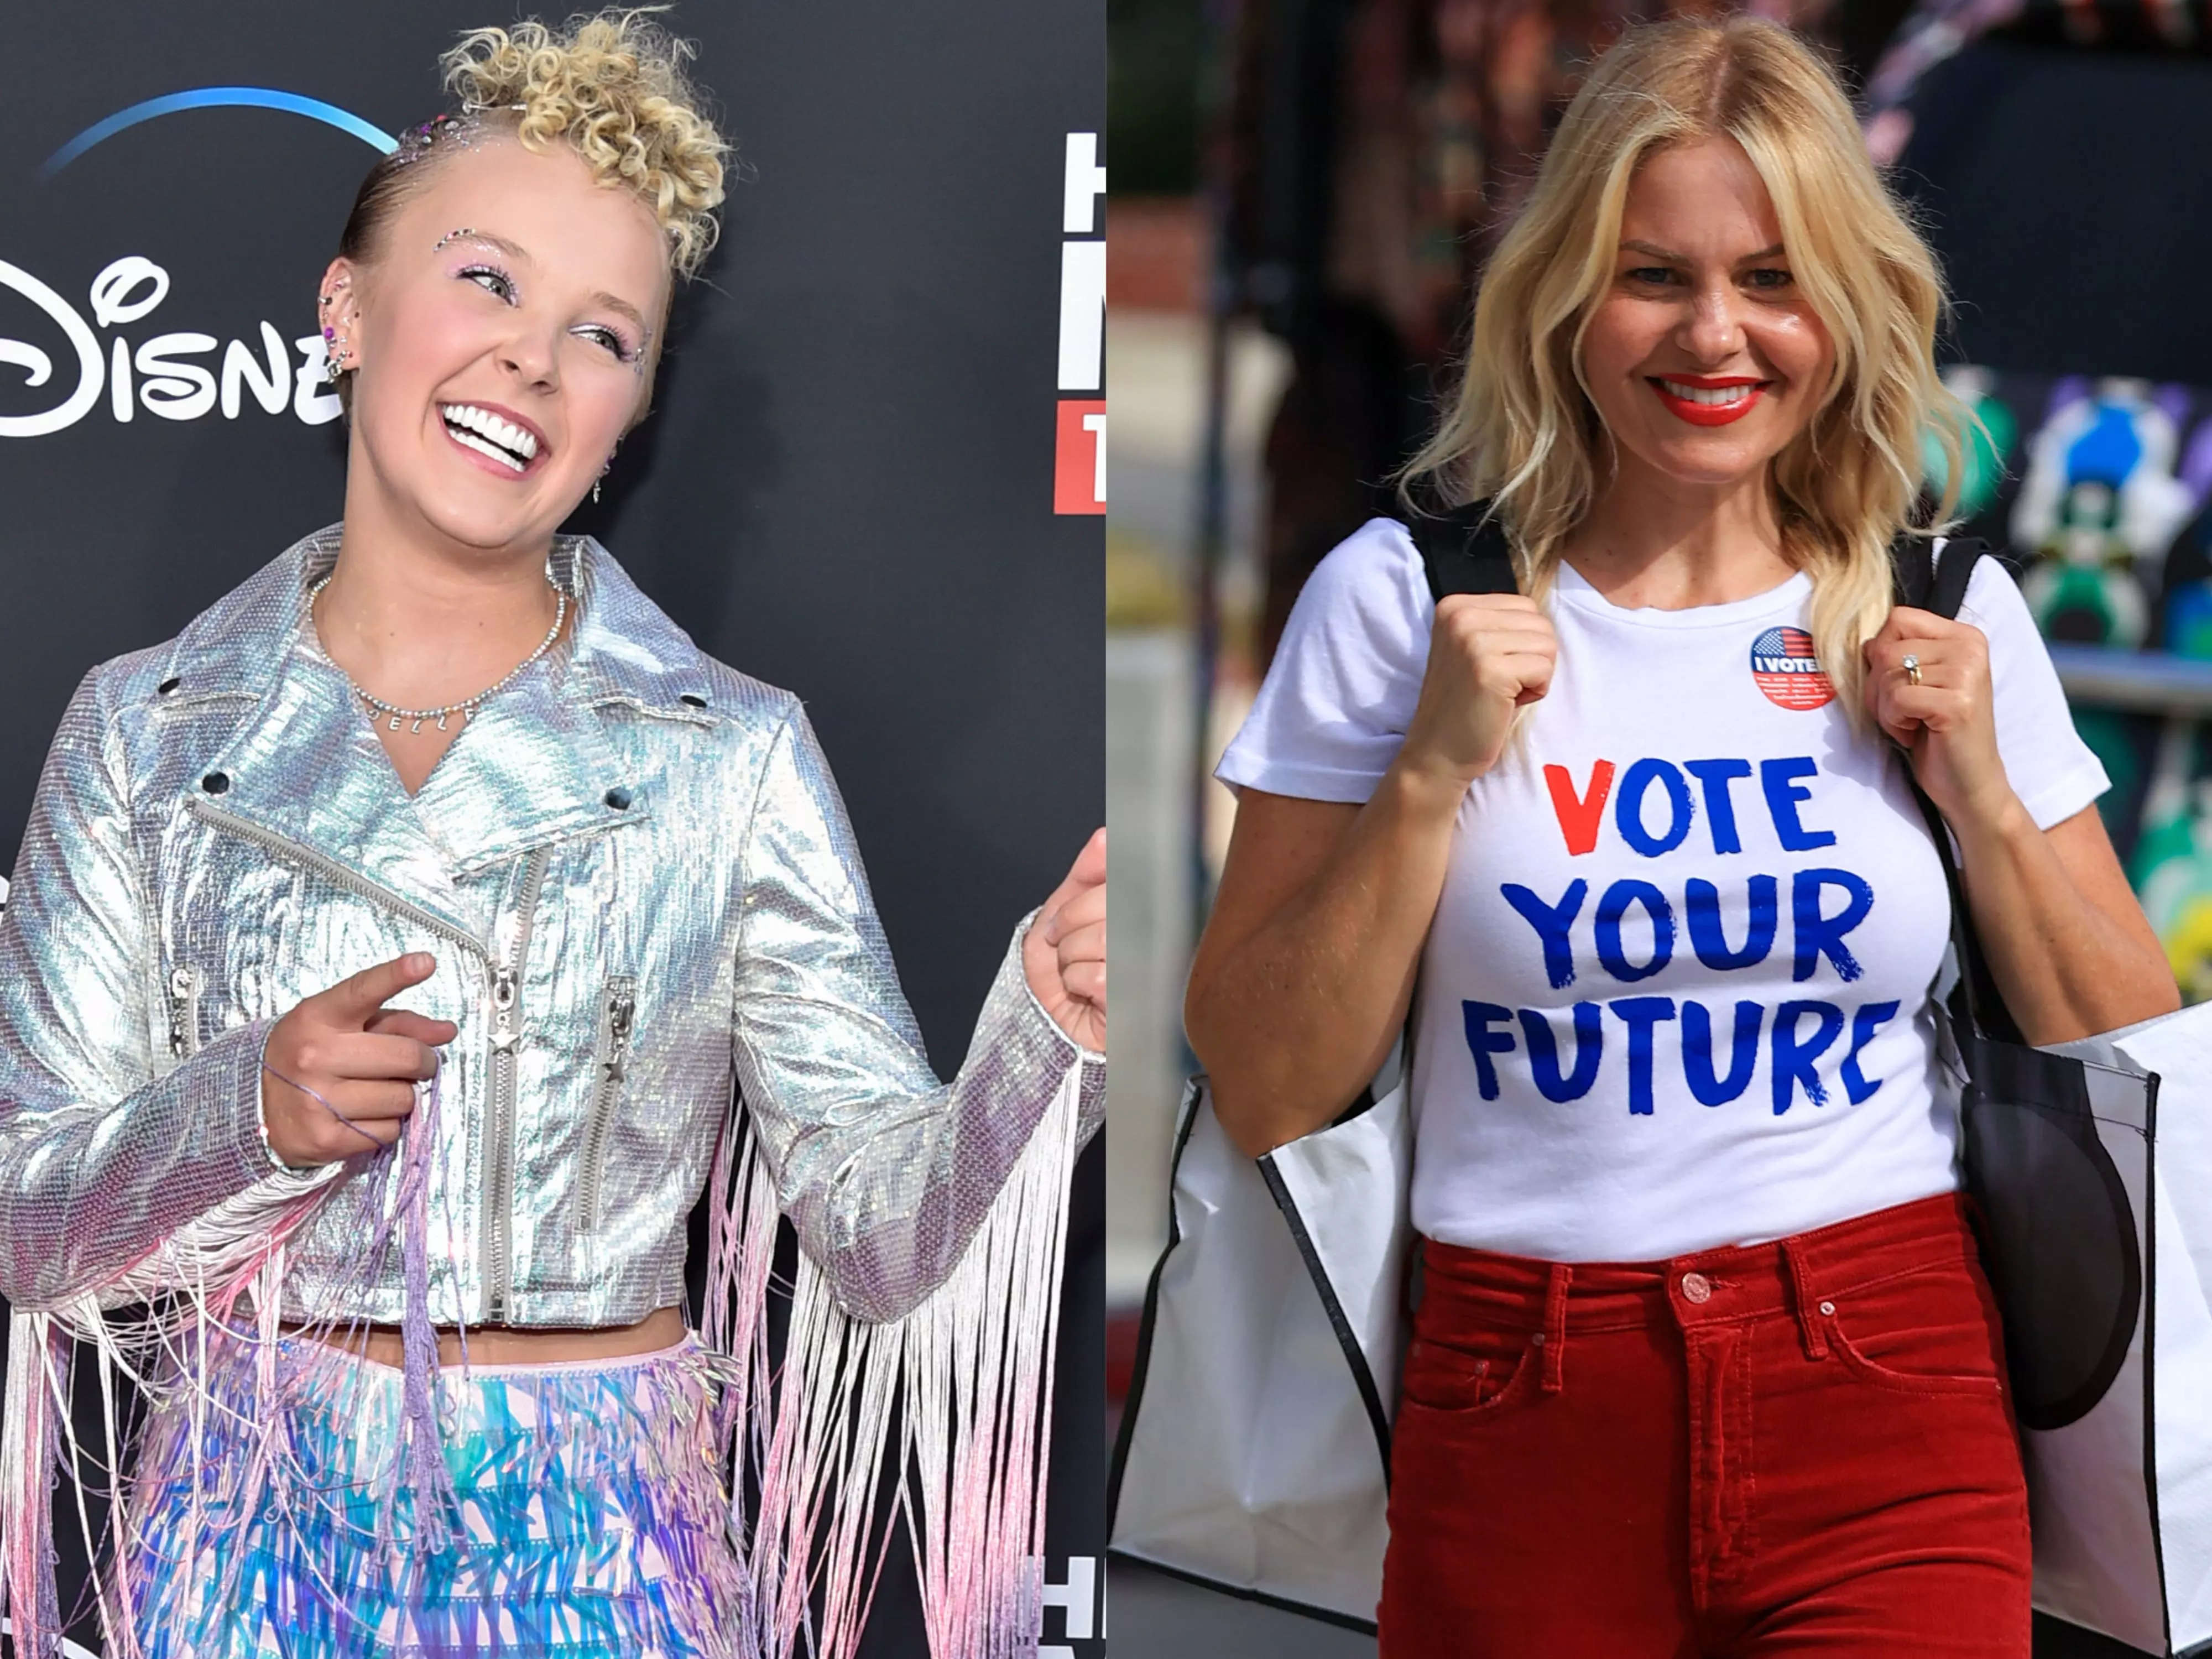 Jojo Siwa Said Not All Of The Story Was Told About Why She Labeled Candace Cameron Bure The